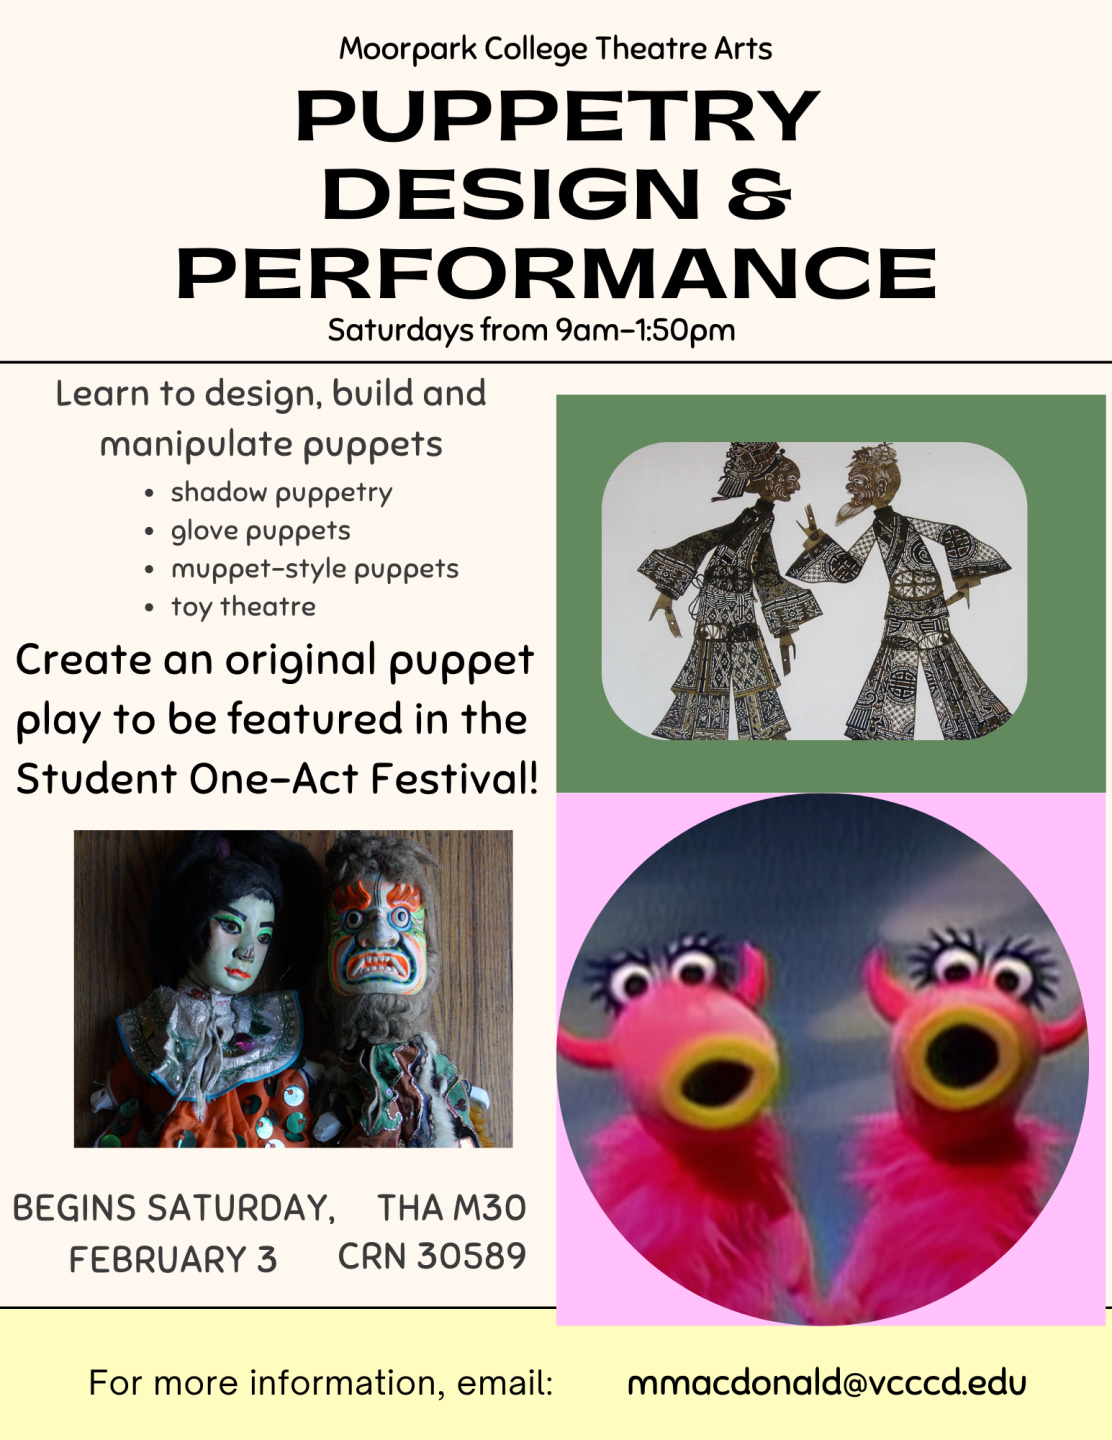 Puppetry Design and Performance